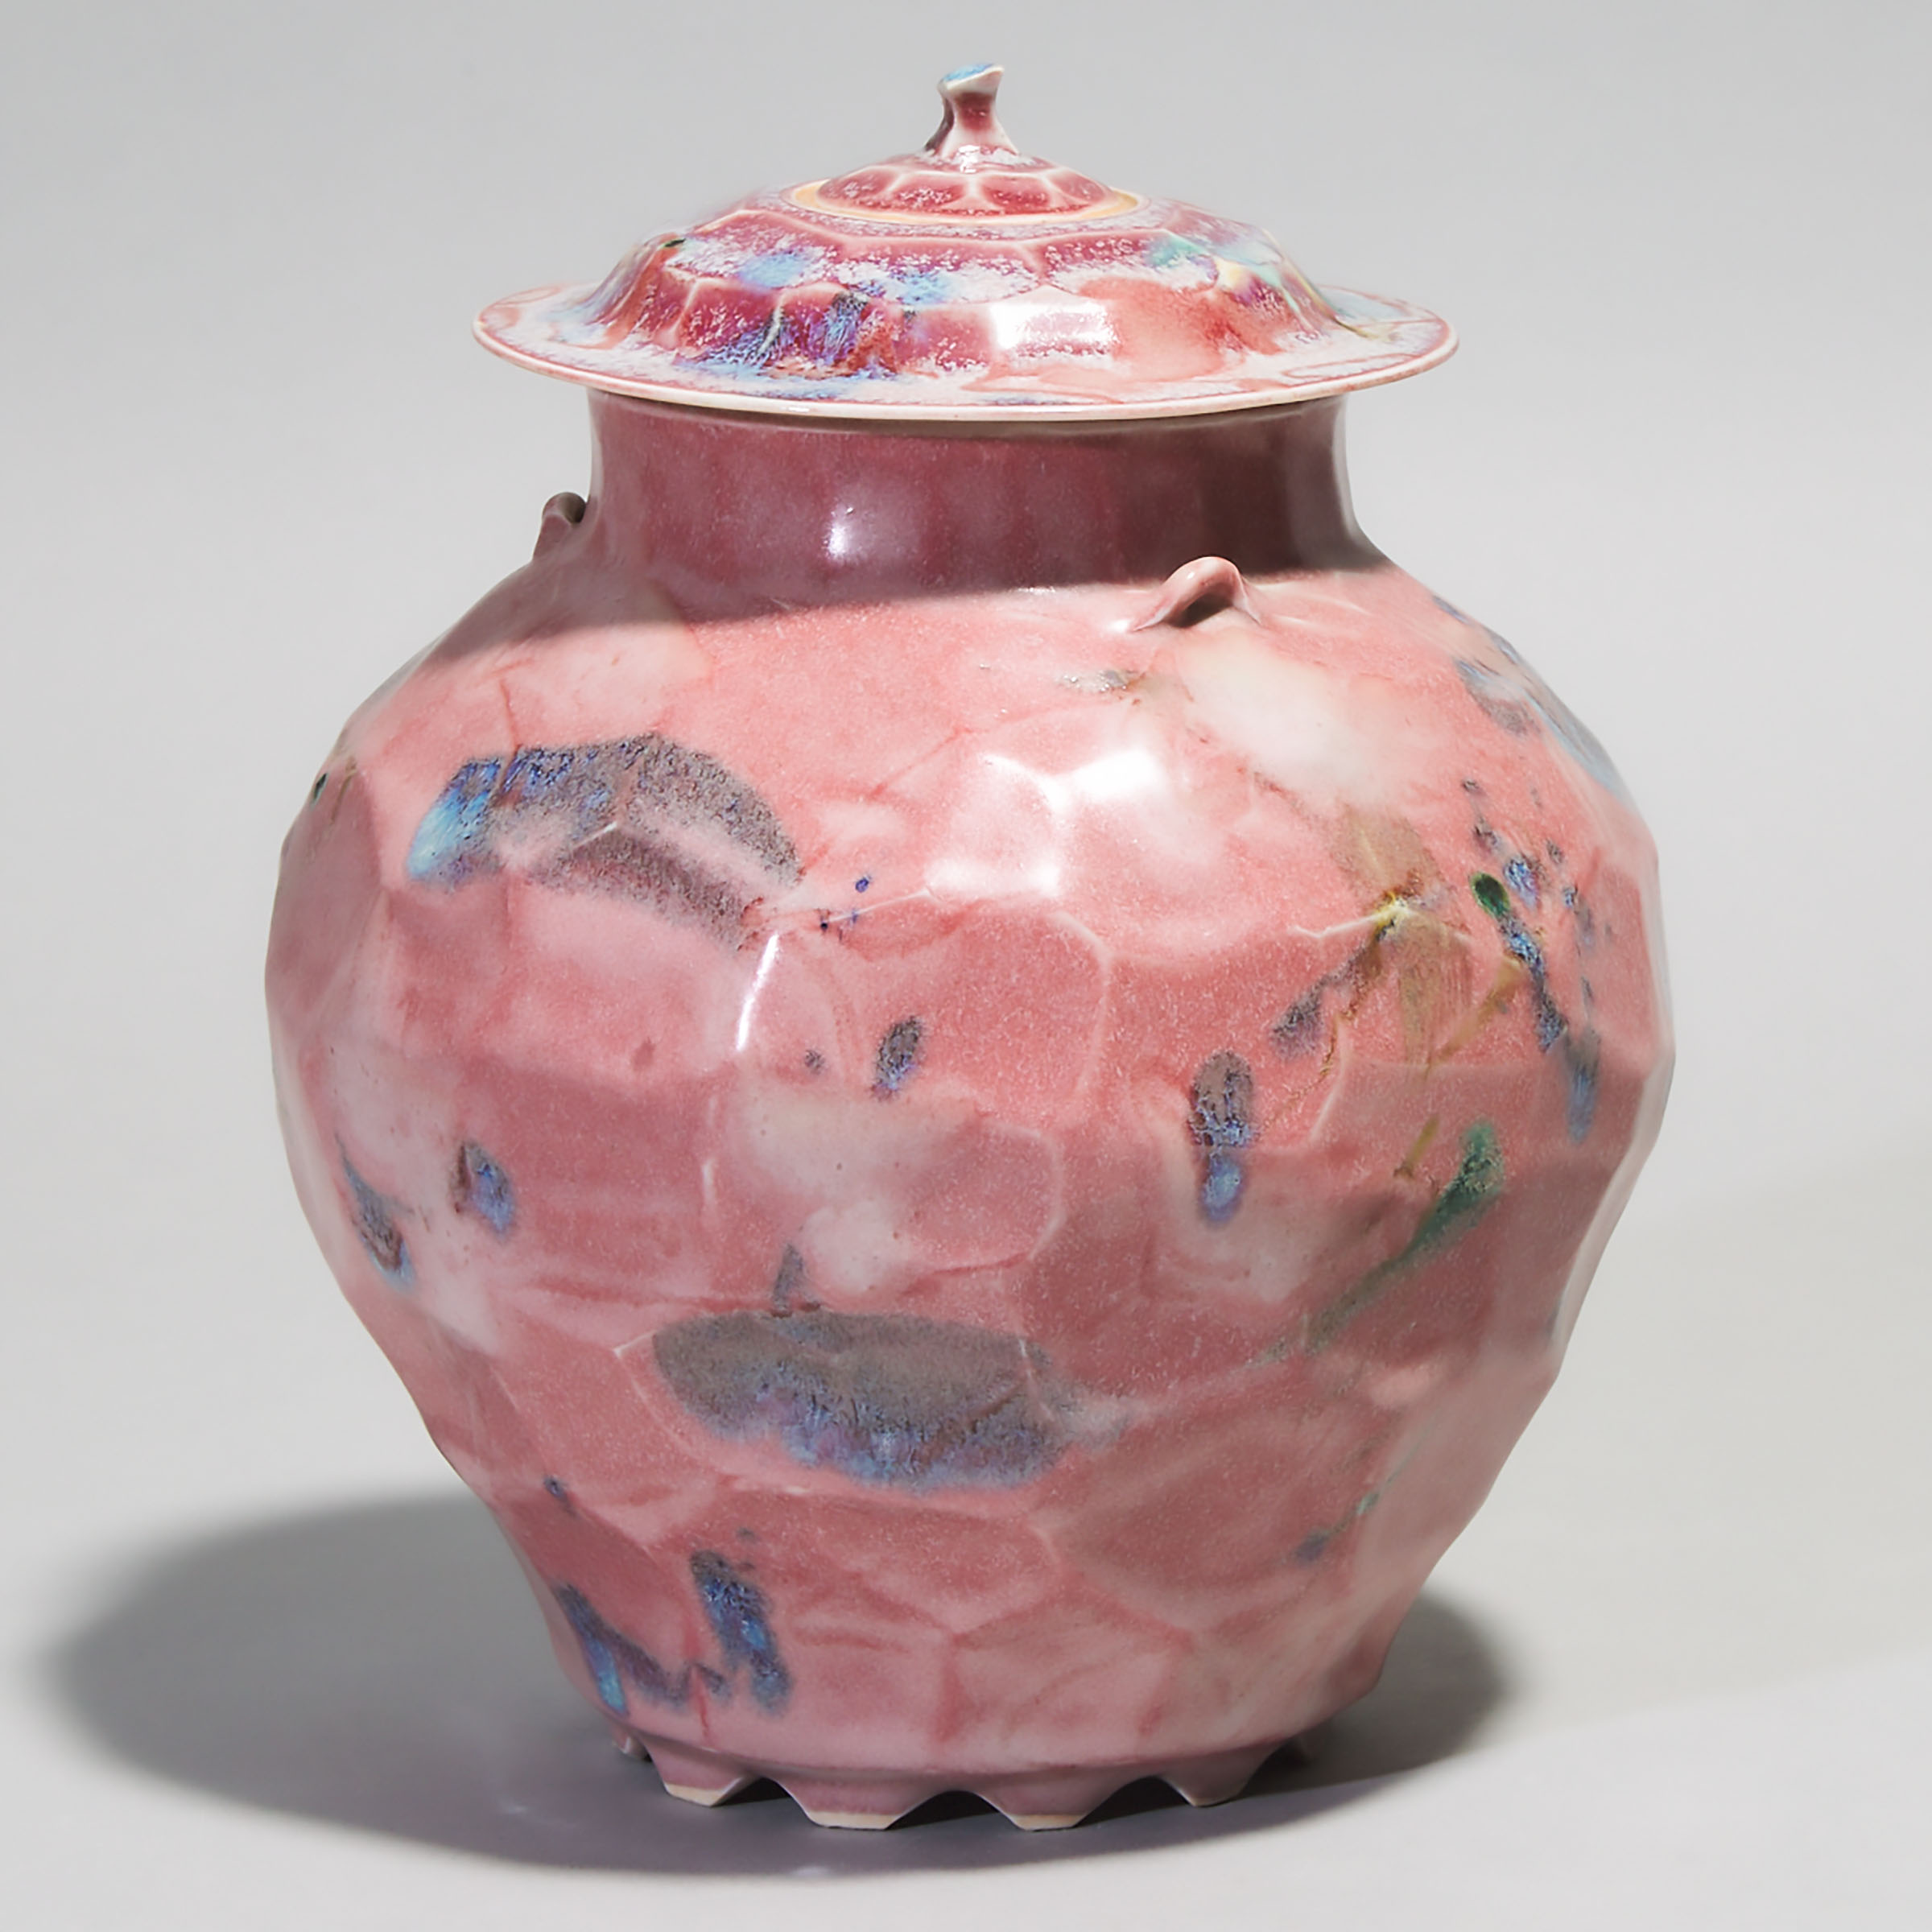 Kayo O'Young (Canadian, b.1950), Rose and Blue Glazed Double Covered Jar, 1993